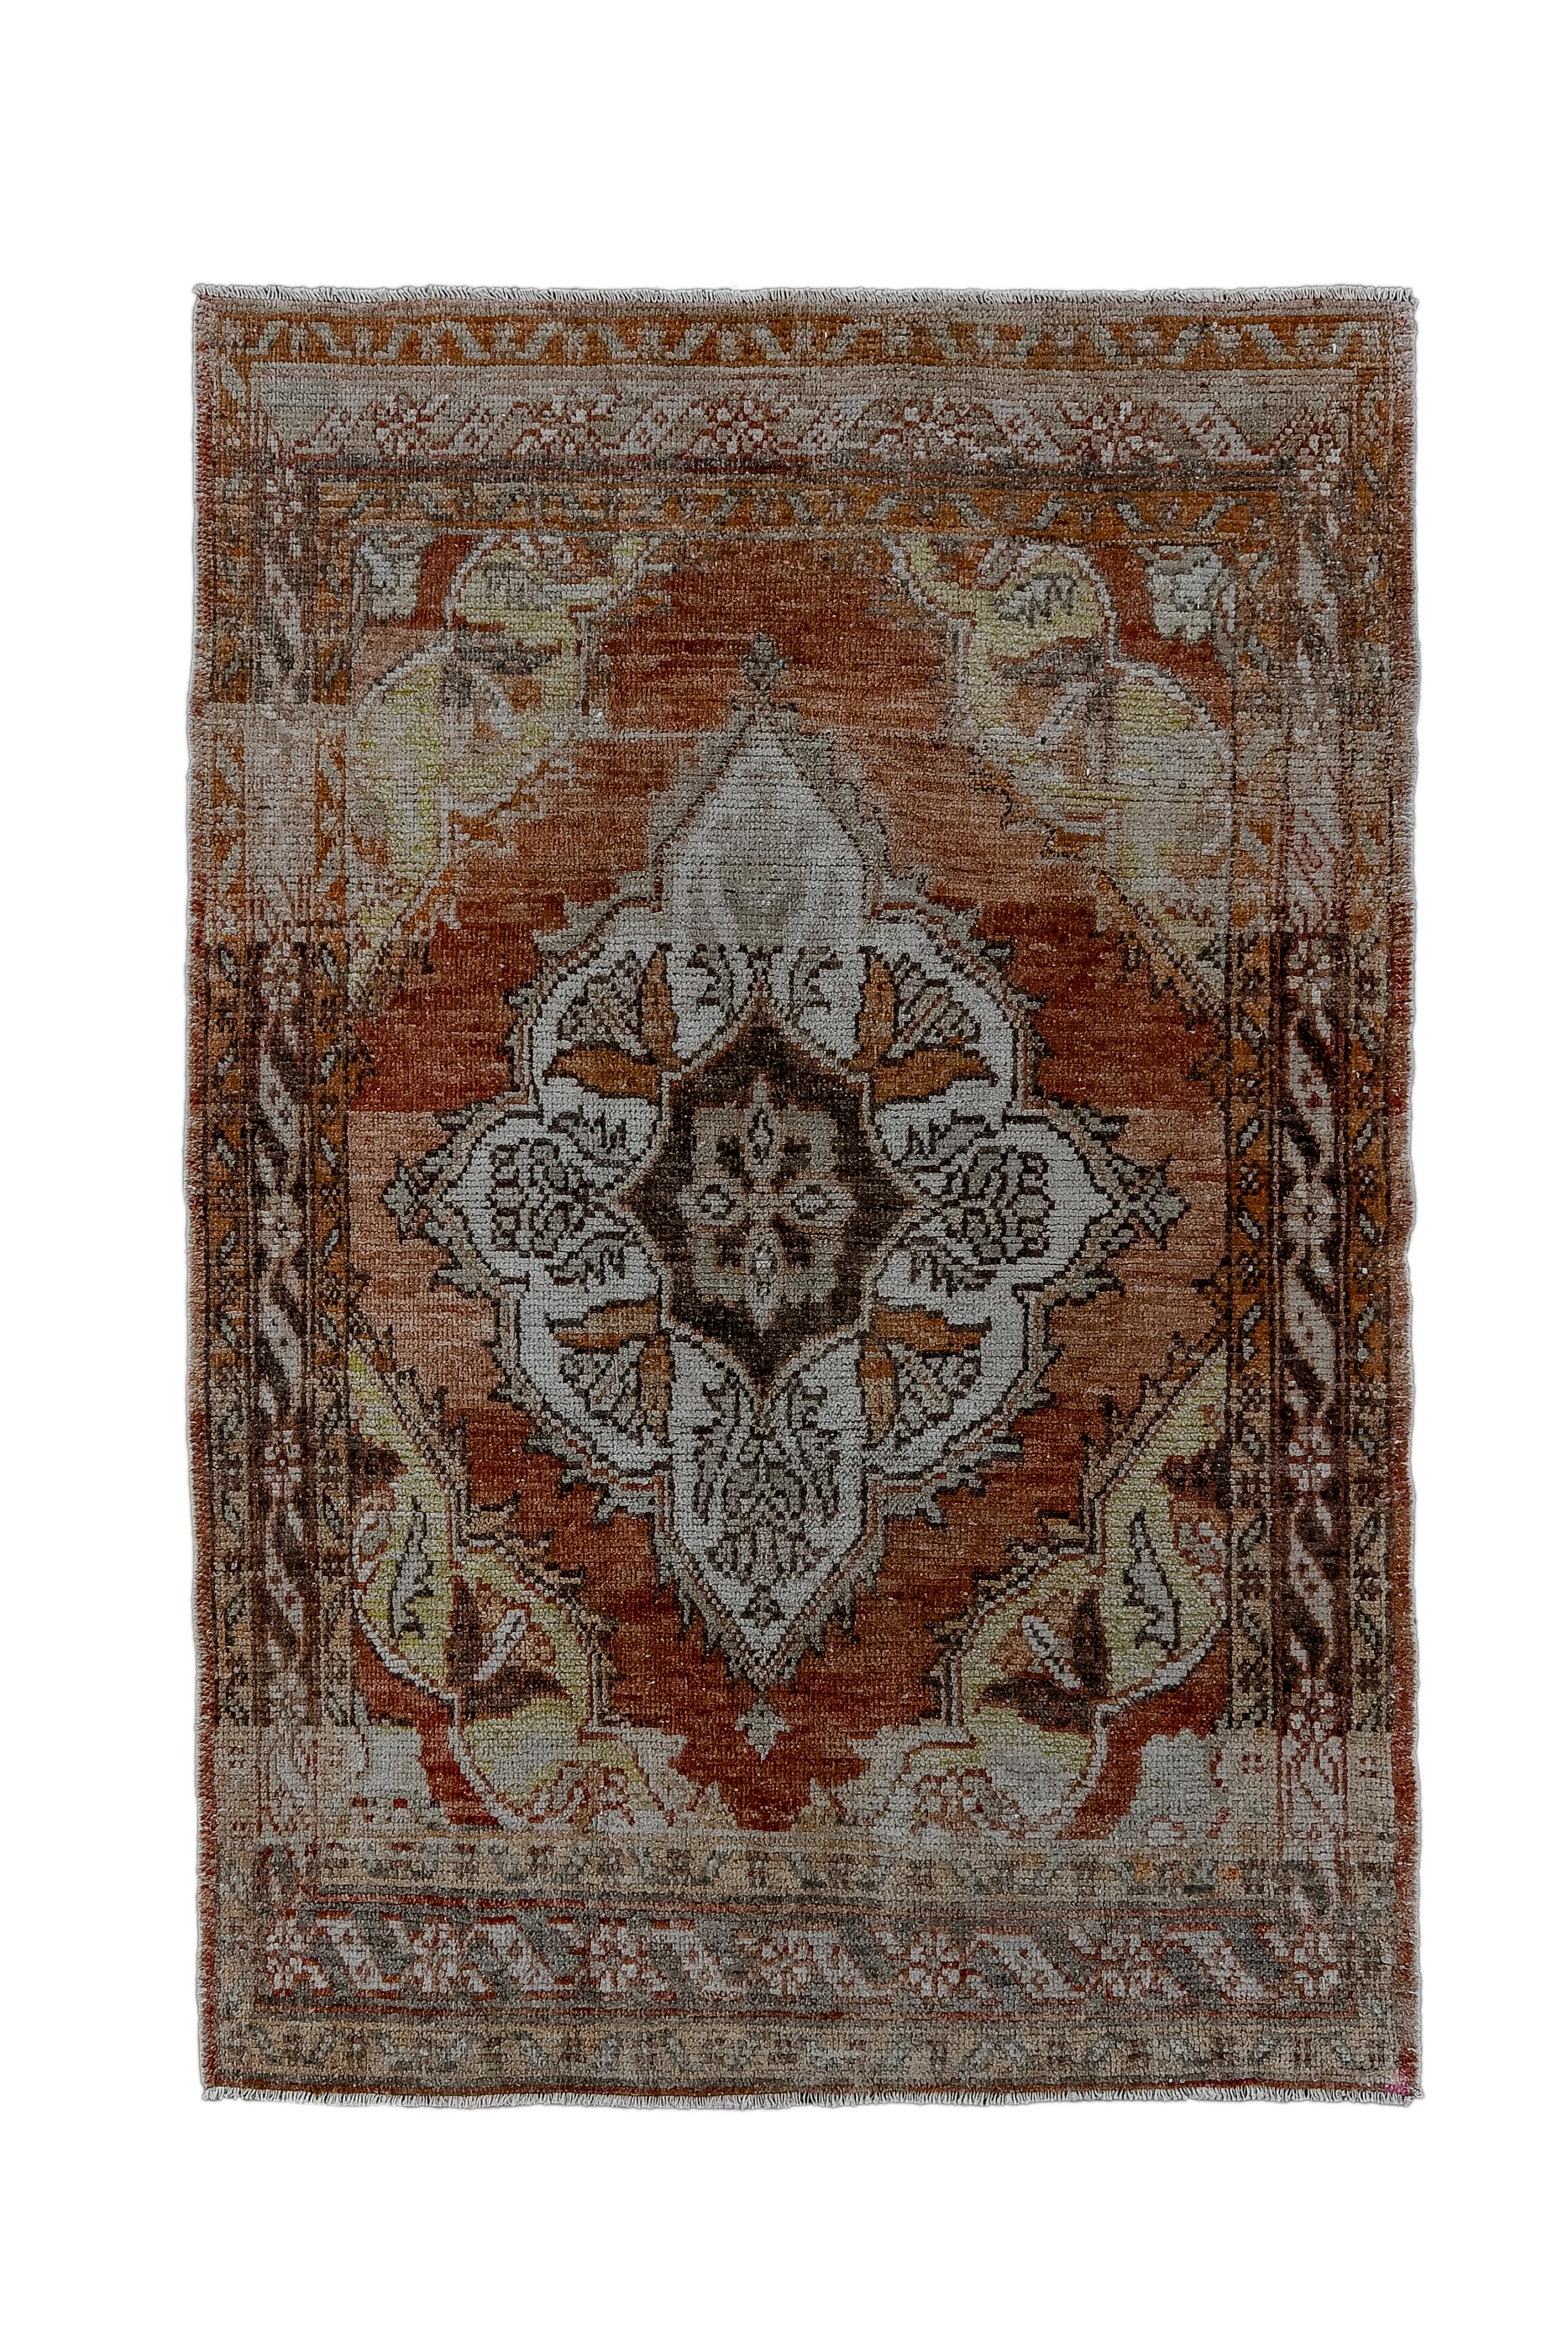 The strong abrashed ruby red field hosts a giant lobed ecru medallion with eight internally radiating flowers. Straw corners with similar blossoms. Abrashed slate border with rosettes and stretched S shapes. Cotton warp, coarse weave.

Rug